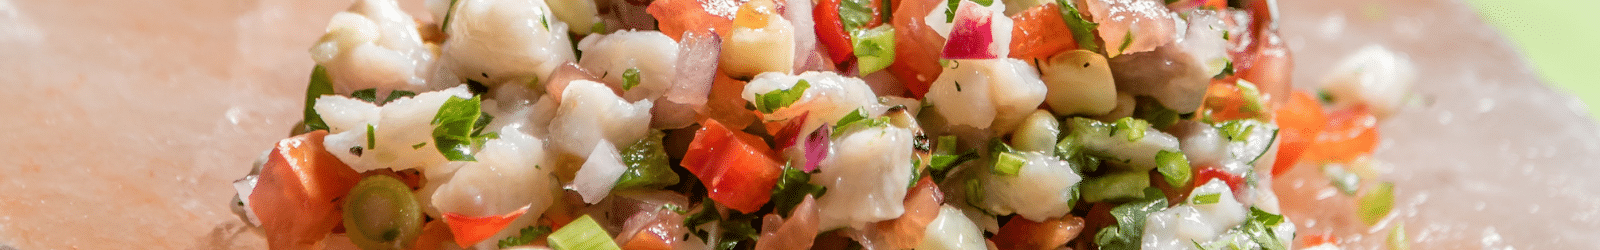 Pink Salt-Block Ceviche Tossed with Cilantro Tomatoes Seasonings